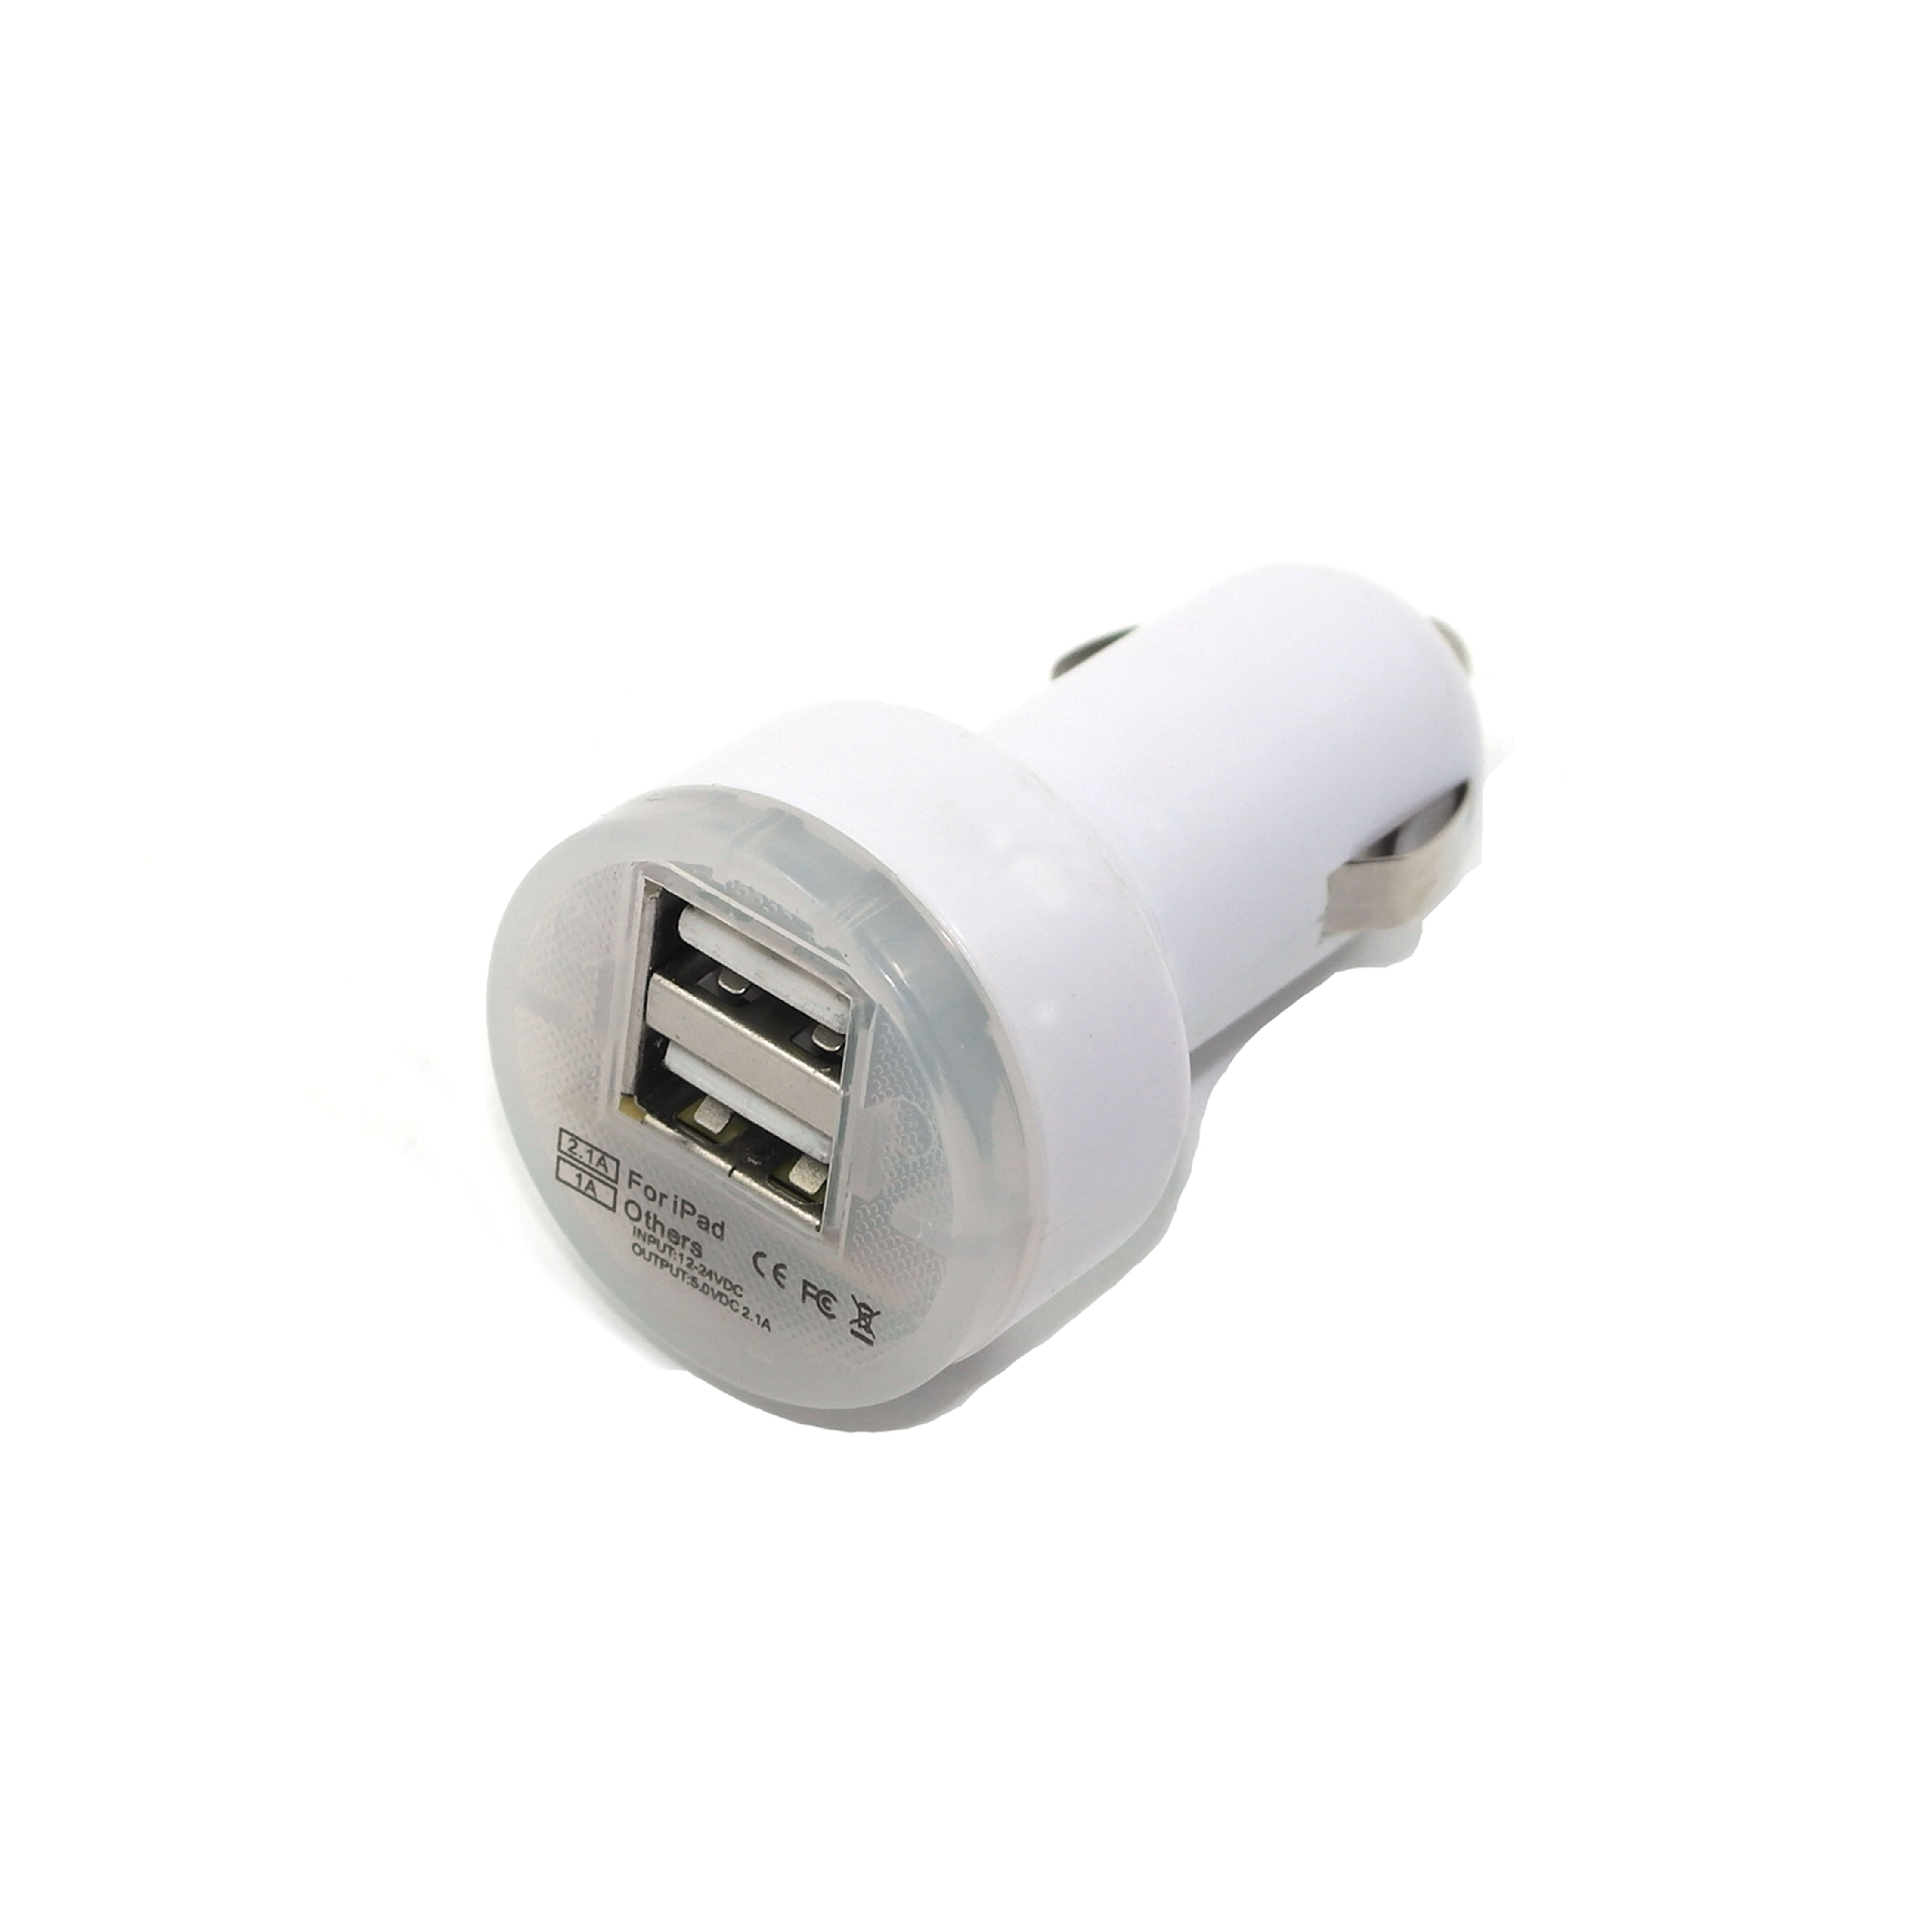 KRE-0503100C,5V 3.1A USB Car Charger, Dual USB In-car charger